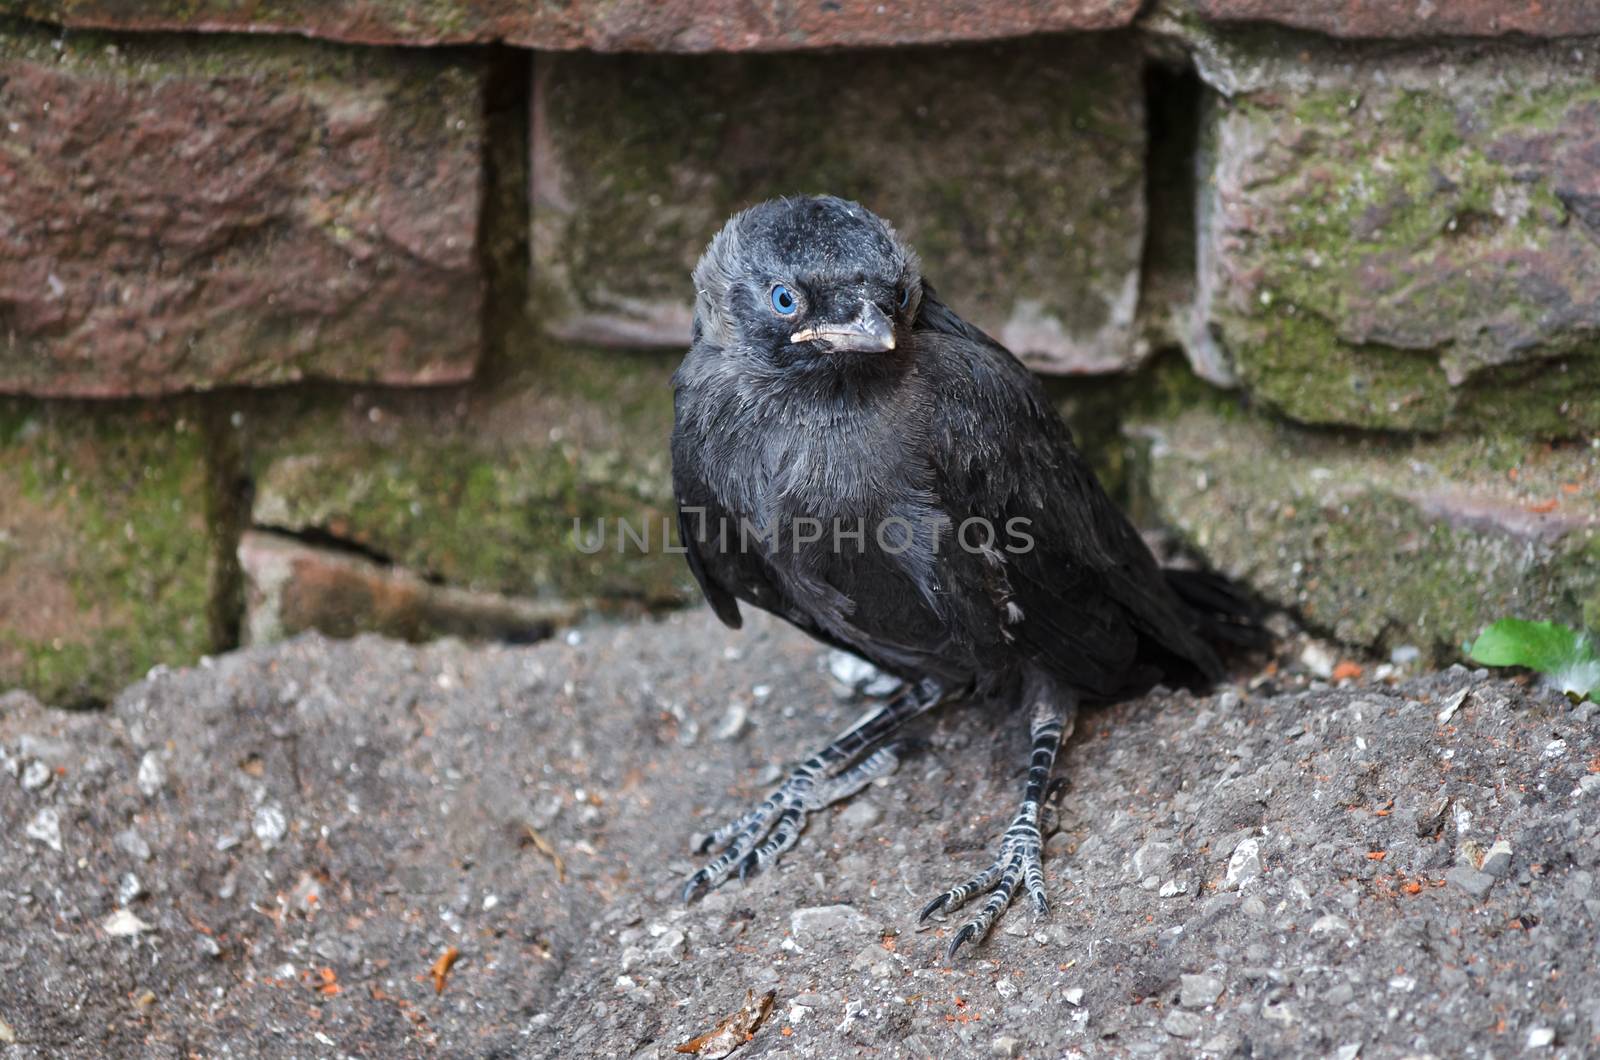 Nestling DAWs sits on the ground by Gaina